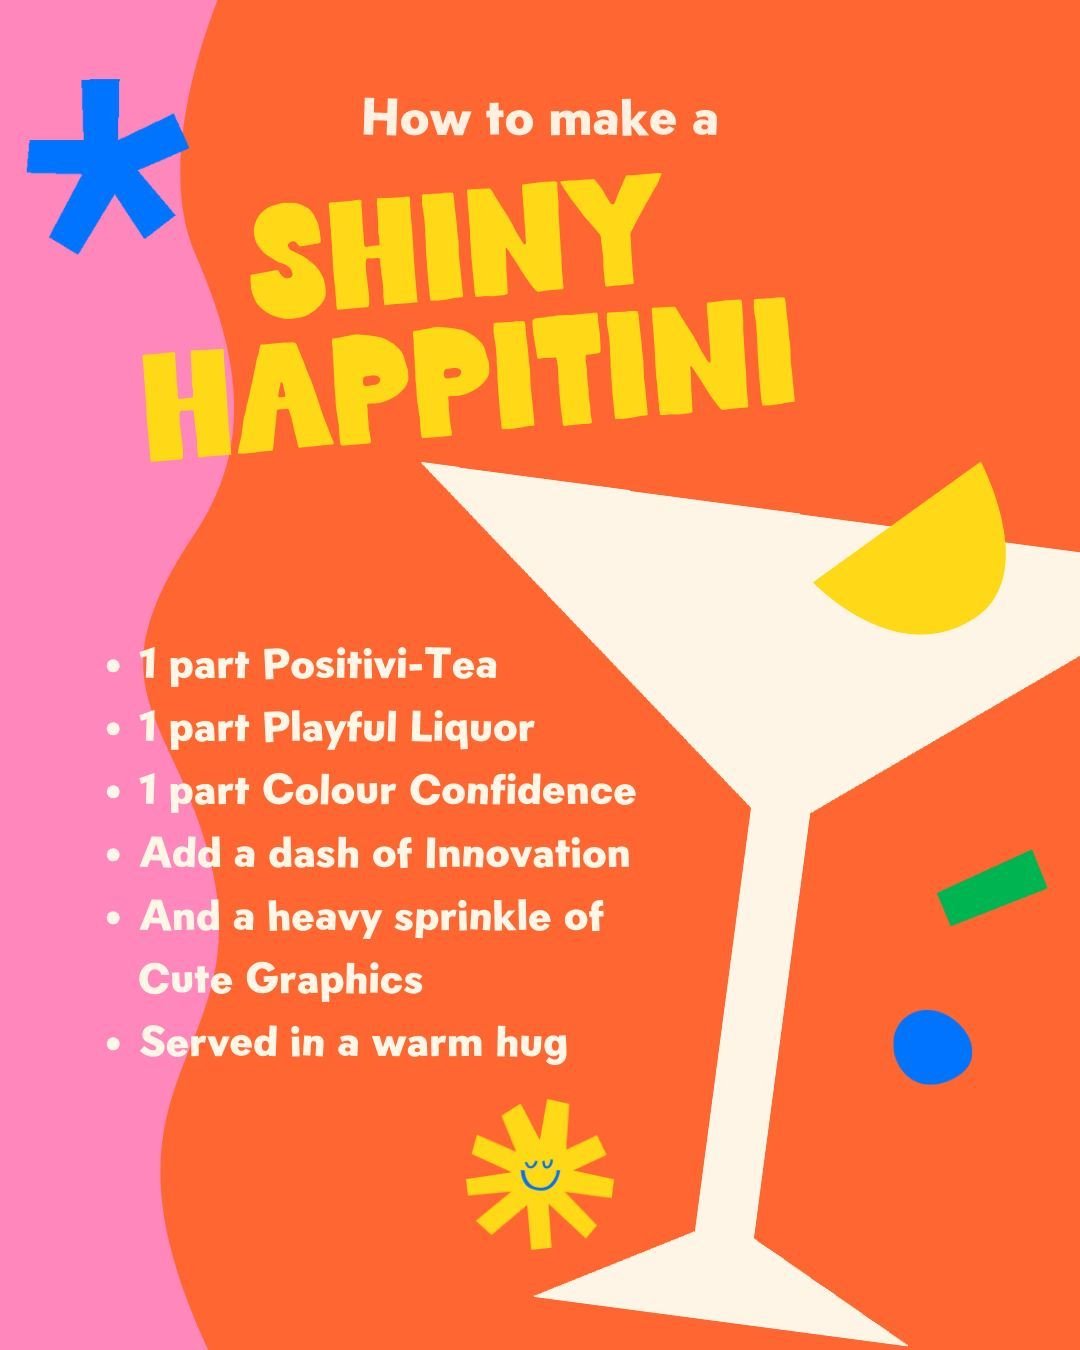 Introducing... the Shiny Happitini! 🍸⁠
⁠
A Shiny Happy exclusive for World Cocktail Day that exists purely in my imagination 😆⁠
⁠
Vibrant, fun to look at and it will absolutely warm you from the inside out!⁠
⁠
If you had a brand cocktail, what do y